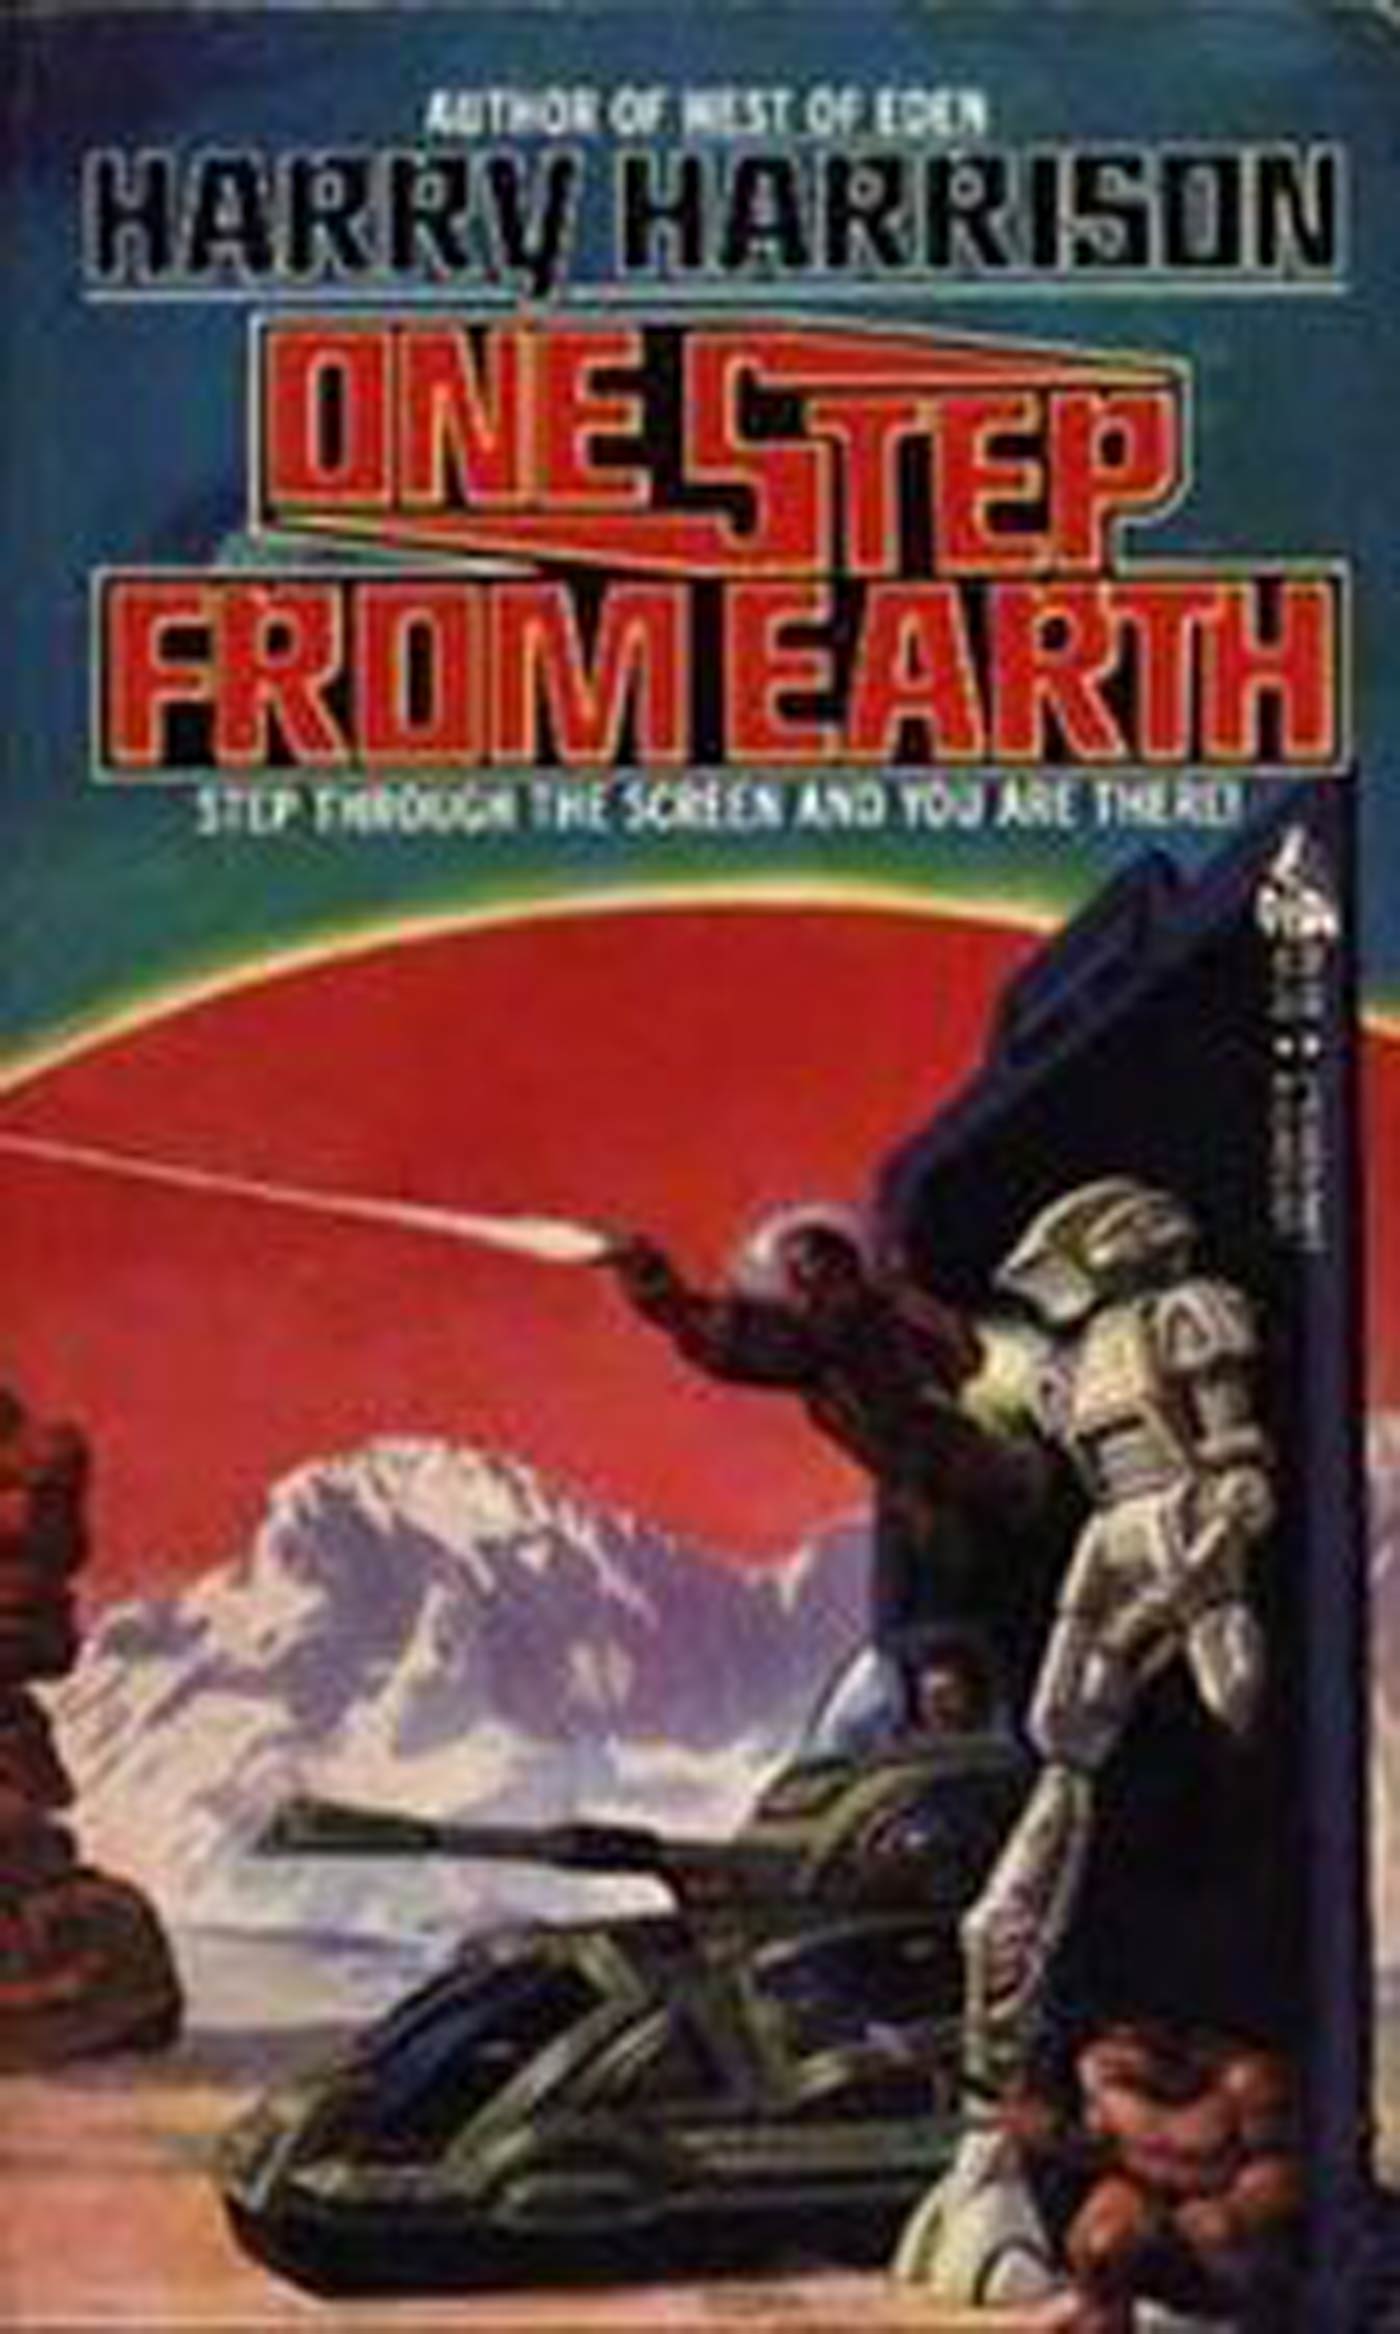 One Step from Earth by Harry Harrison